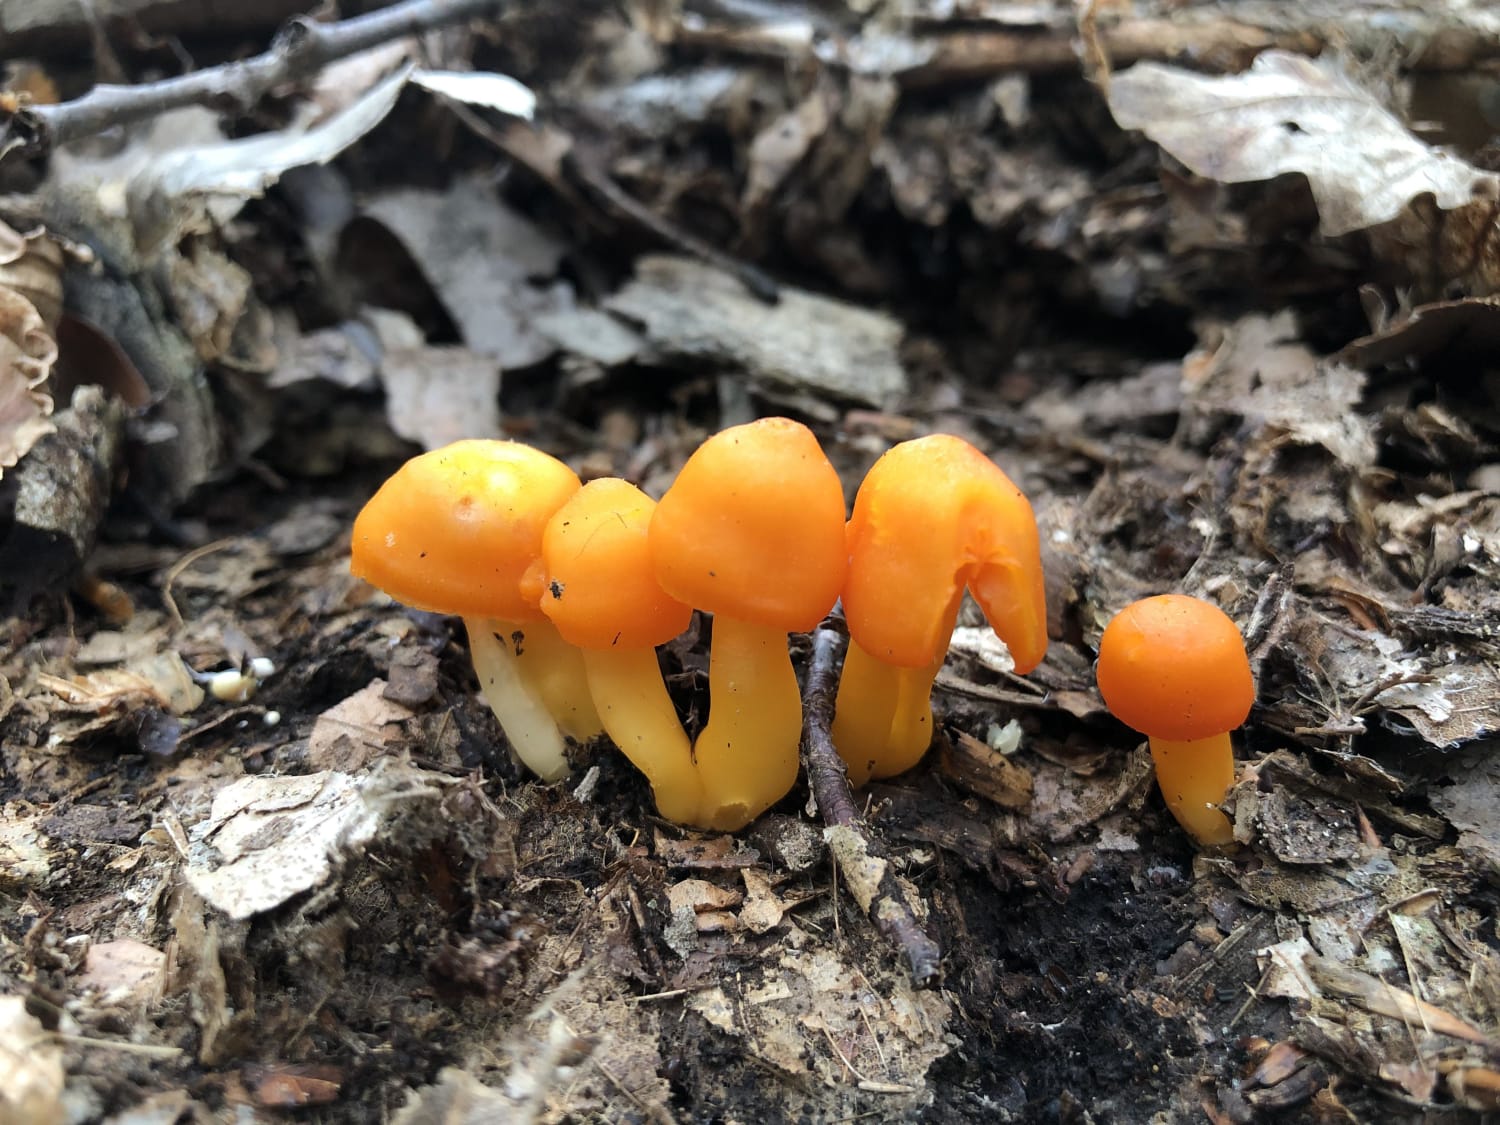 These orange ones were everywhere! No clue what they are. Orange gills white spores. NE Ohio. Growing from ground in mixed deciduous forest.